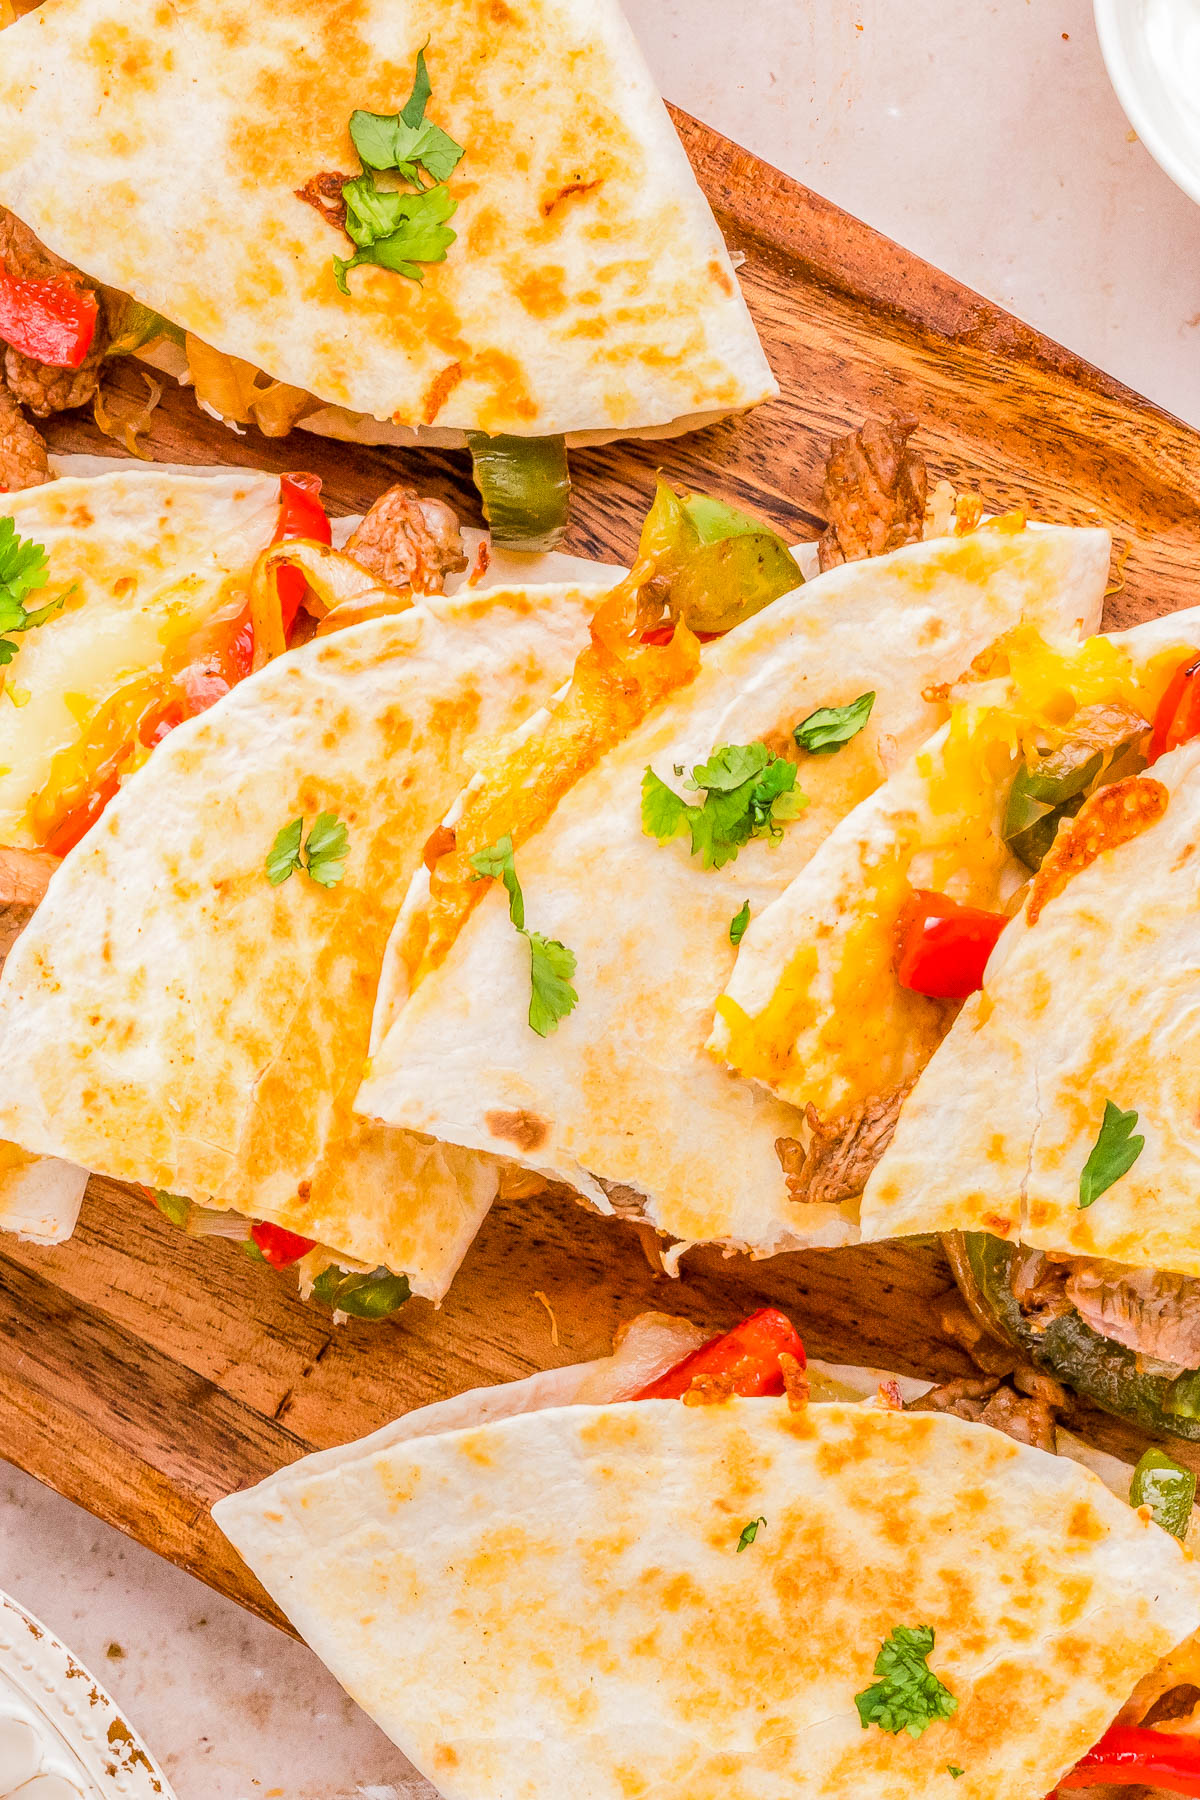 Sliced steak and cheese quesadillas with bell peppers and cilantro on a wooden board.